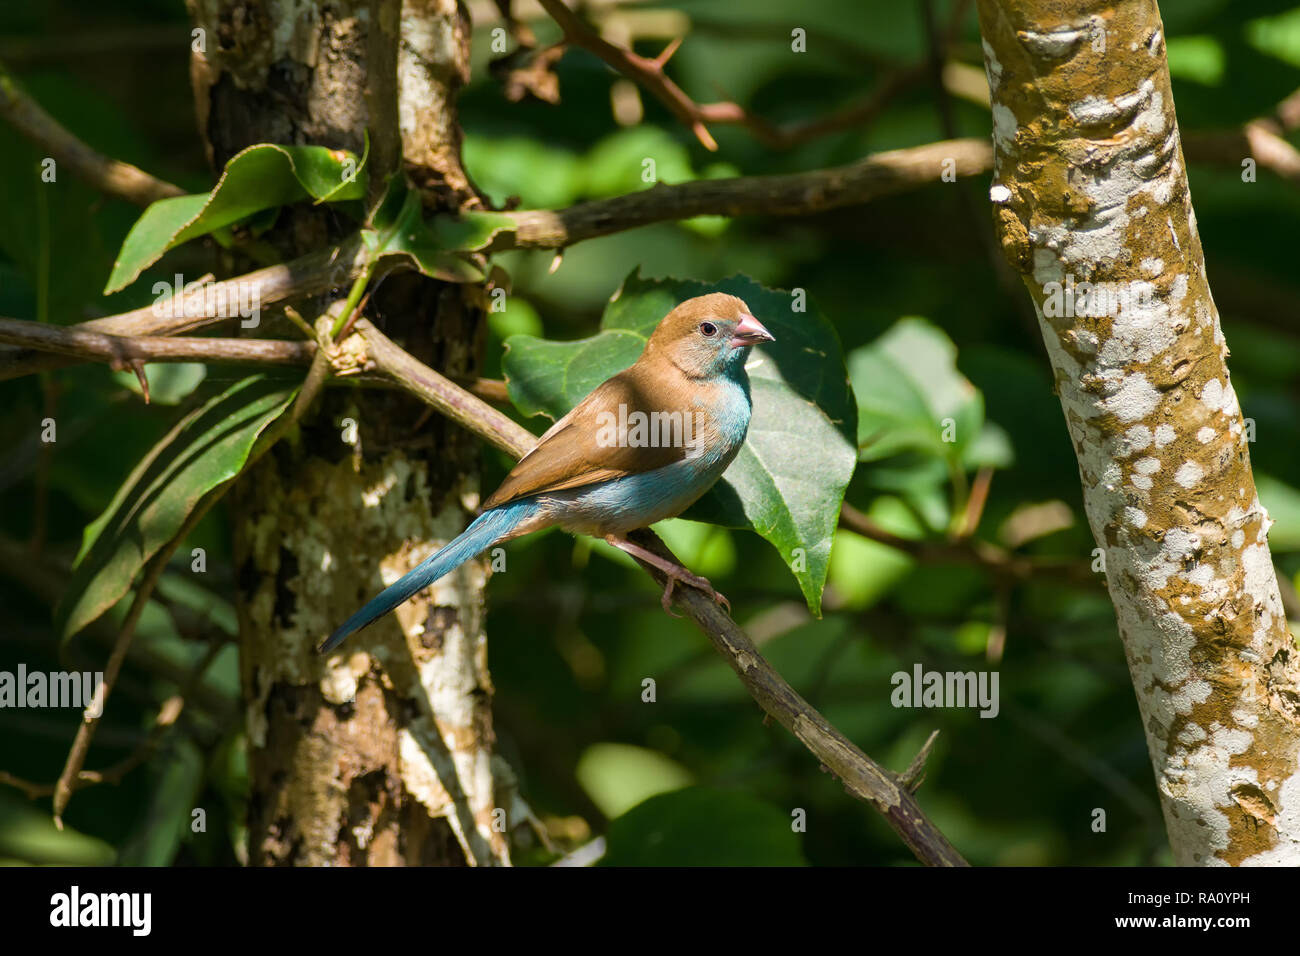 A female Red-cheeked cordon-bleu ( Uraeginthus bengalus ) perched on a branch of a tree, Kenya, East Africa Stock Photo